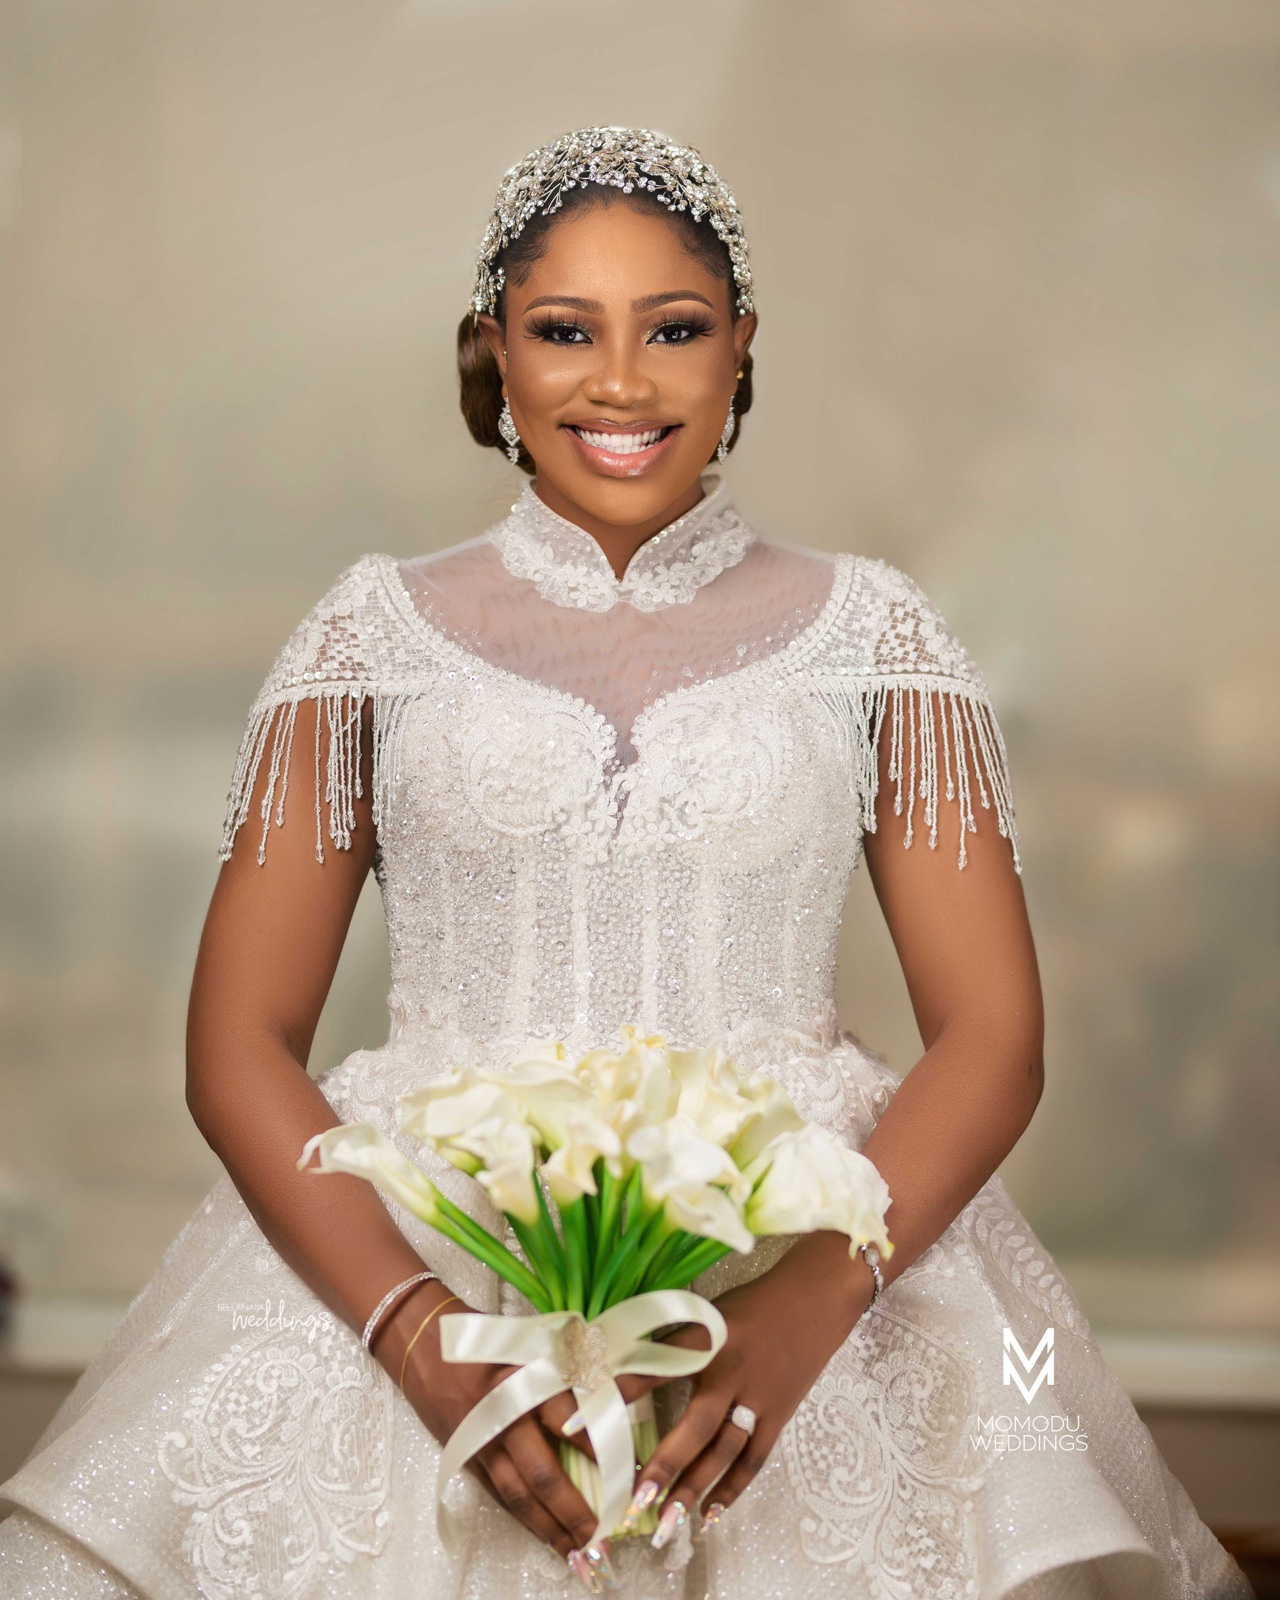 Yes to Forever with You! See Adaora & Chisolu's Exciting Wedding